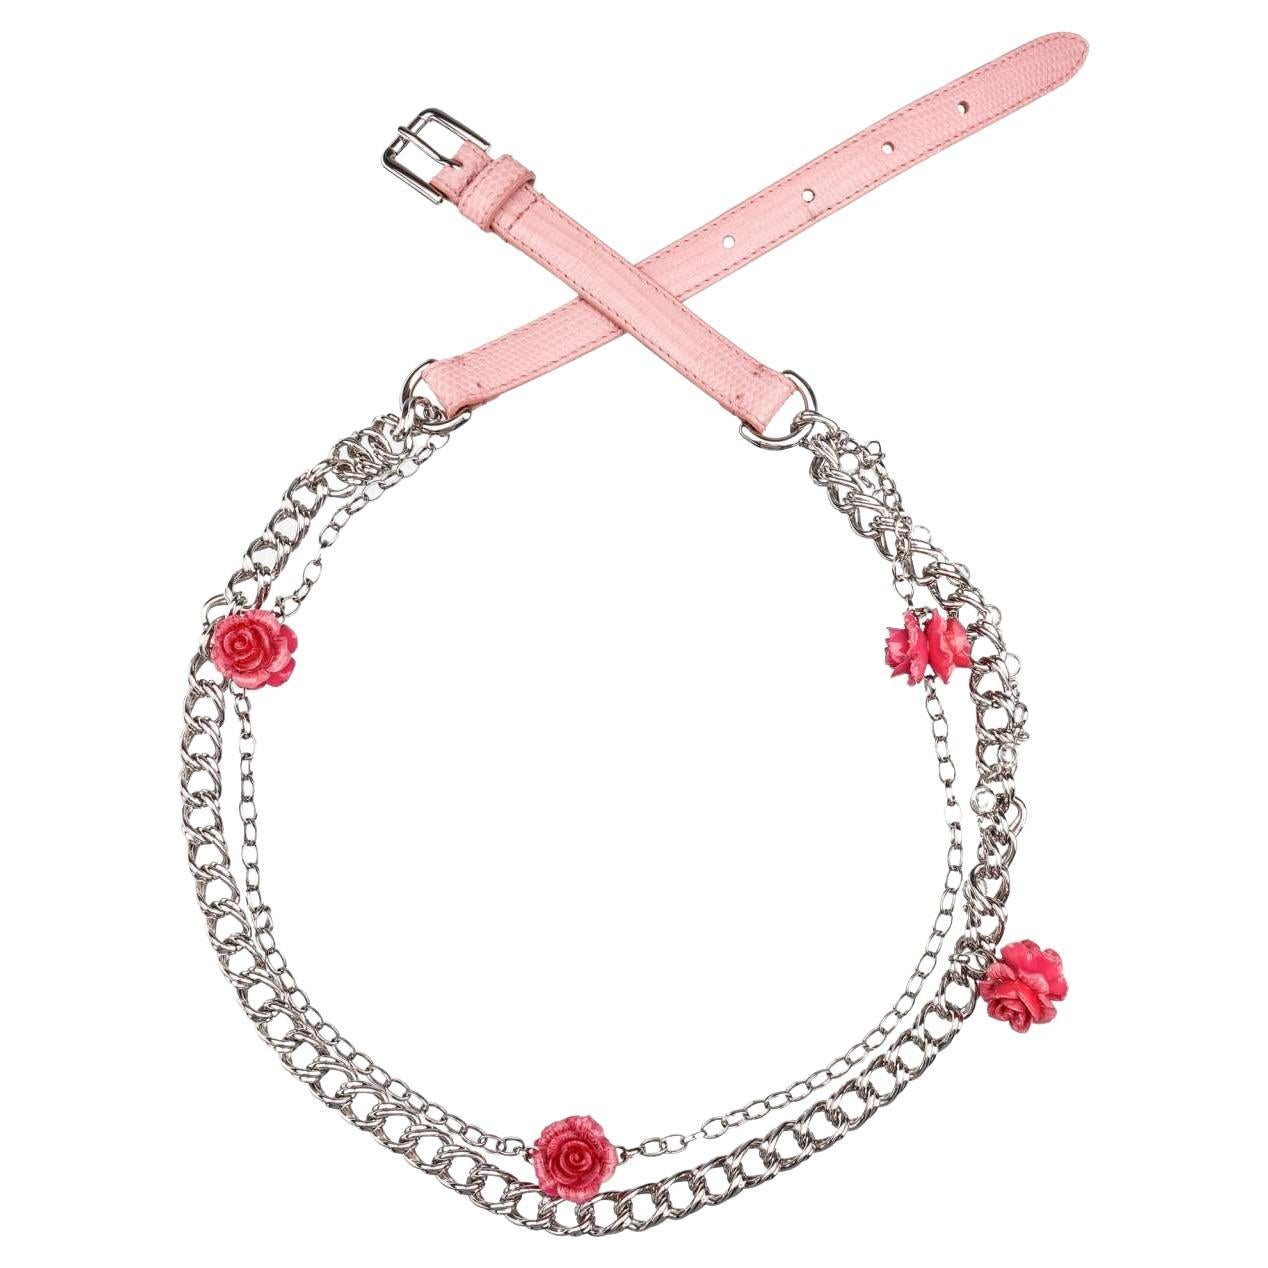 D&G Rose Roses Crystal Lizzard Structure Leather Chain Belt Pink Silver S For Sale